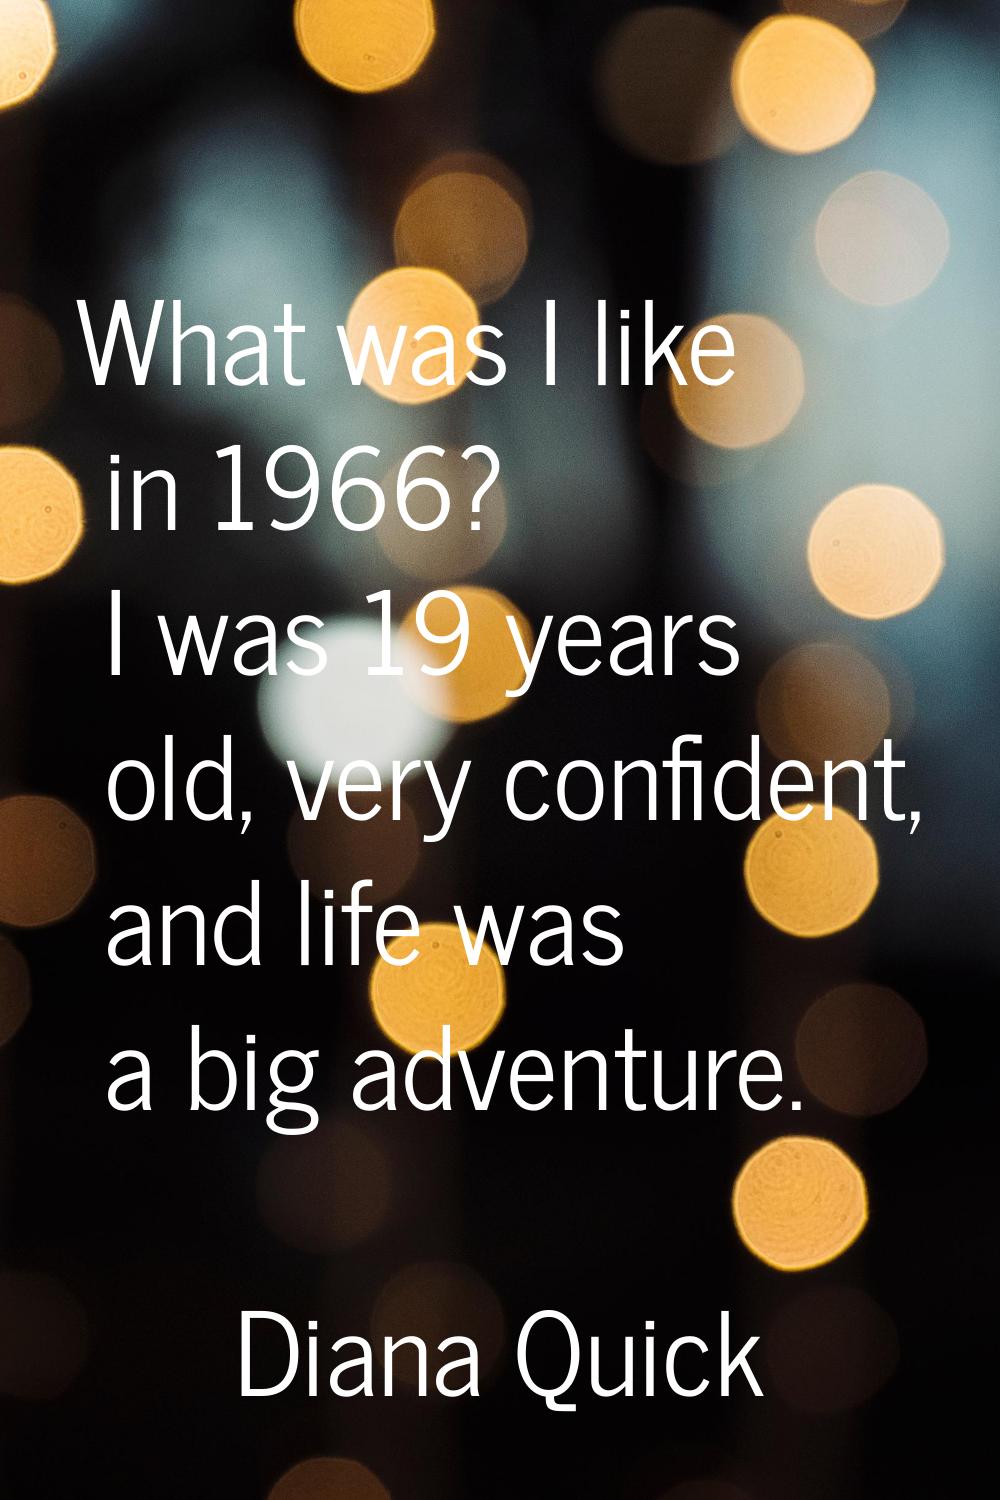 What was I like in 1966? I was 19 years old, very confident, and life was a big adventure.